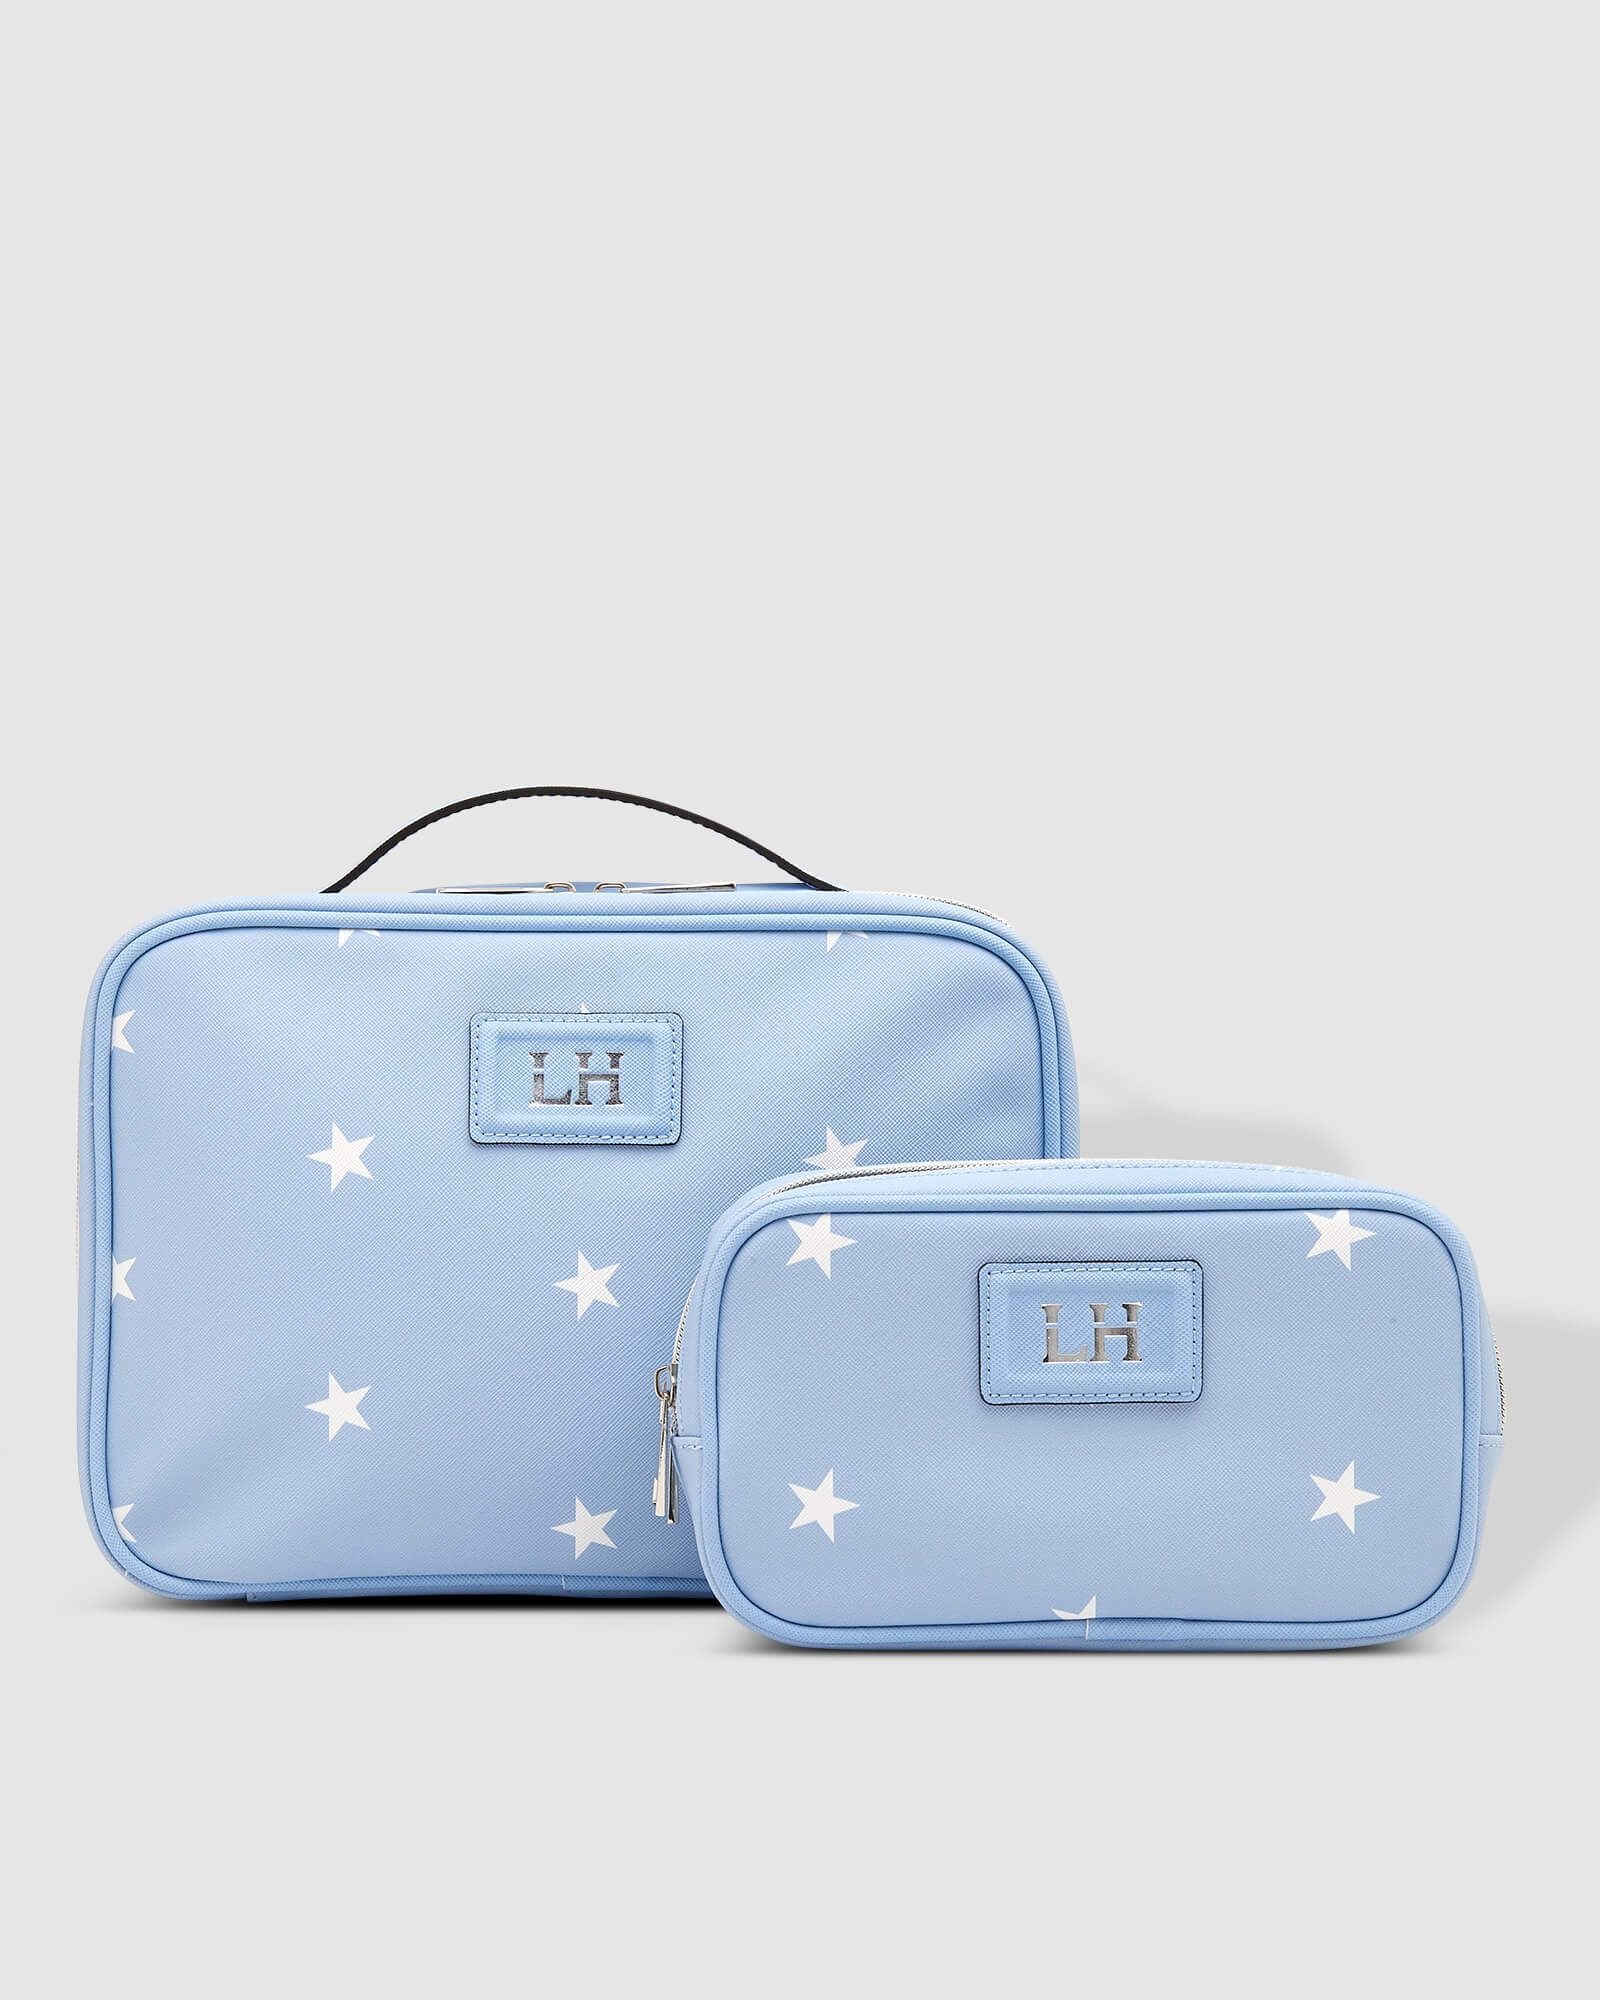 The Louenhide Astrid Iona Cosmetic Set is designed to take you both around the world and on weekend adventures.